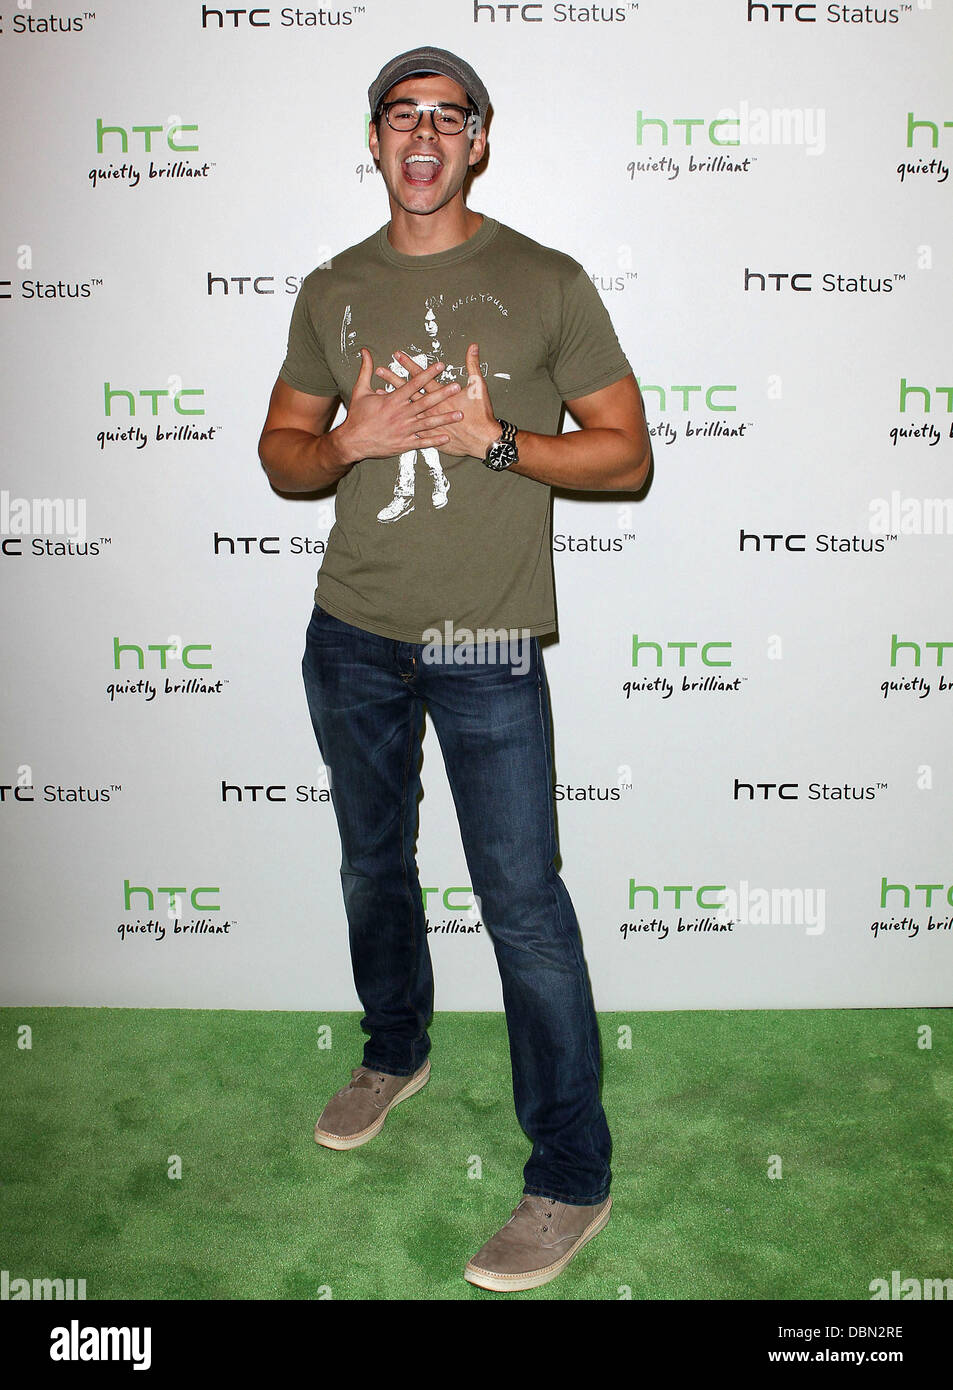 Jayson Blair The HTC Status Social launch event held at Paramount Studios - Arrivals Los Angeles, California - 19.07.11 Stock Photo